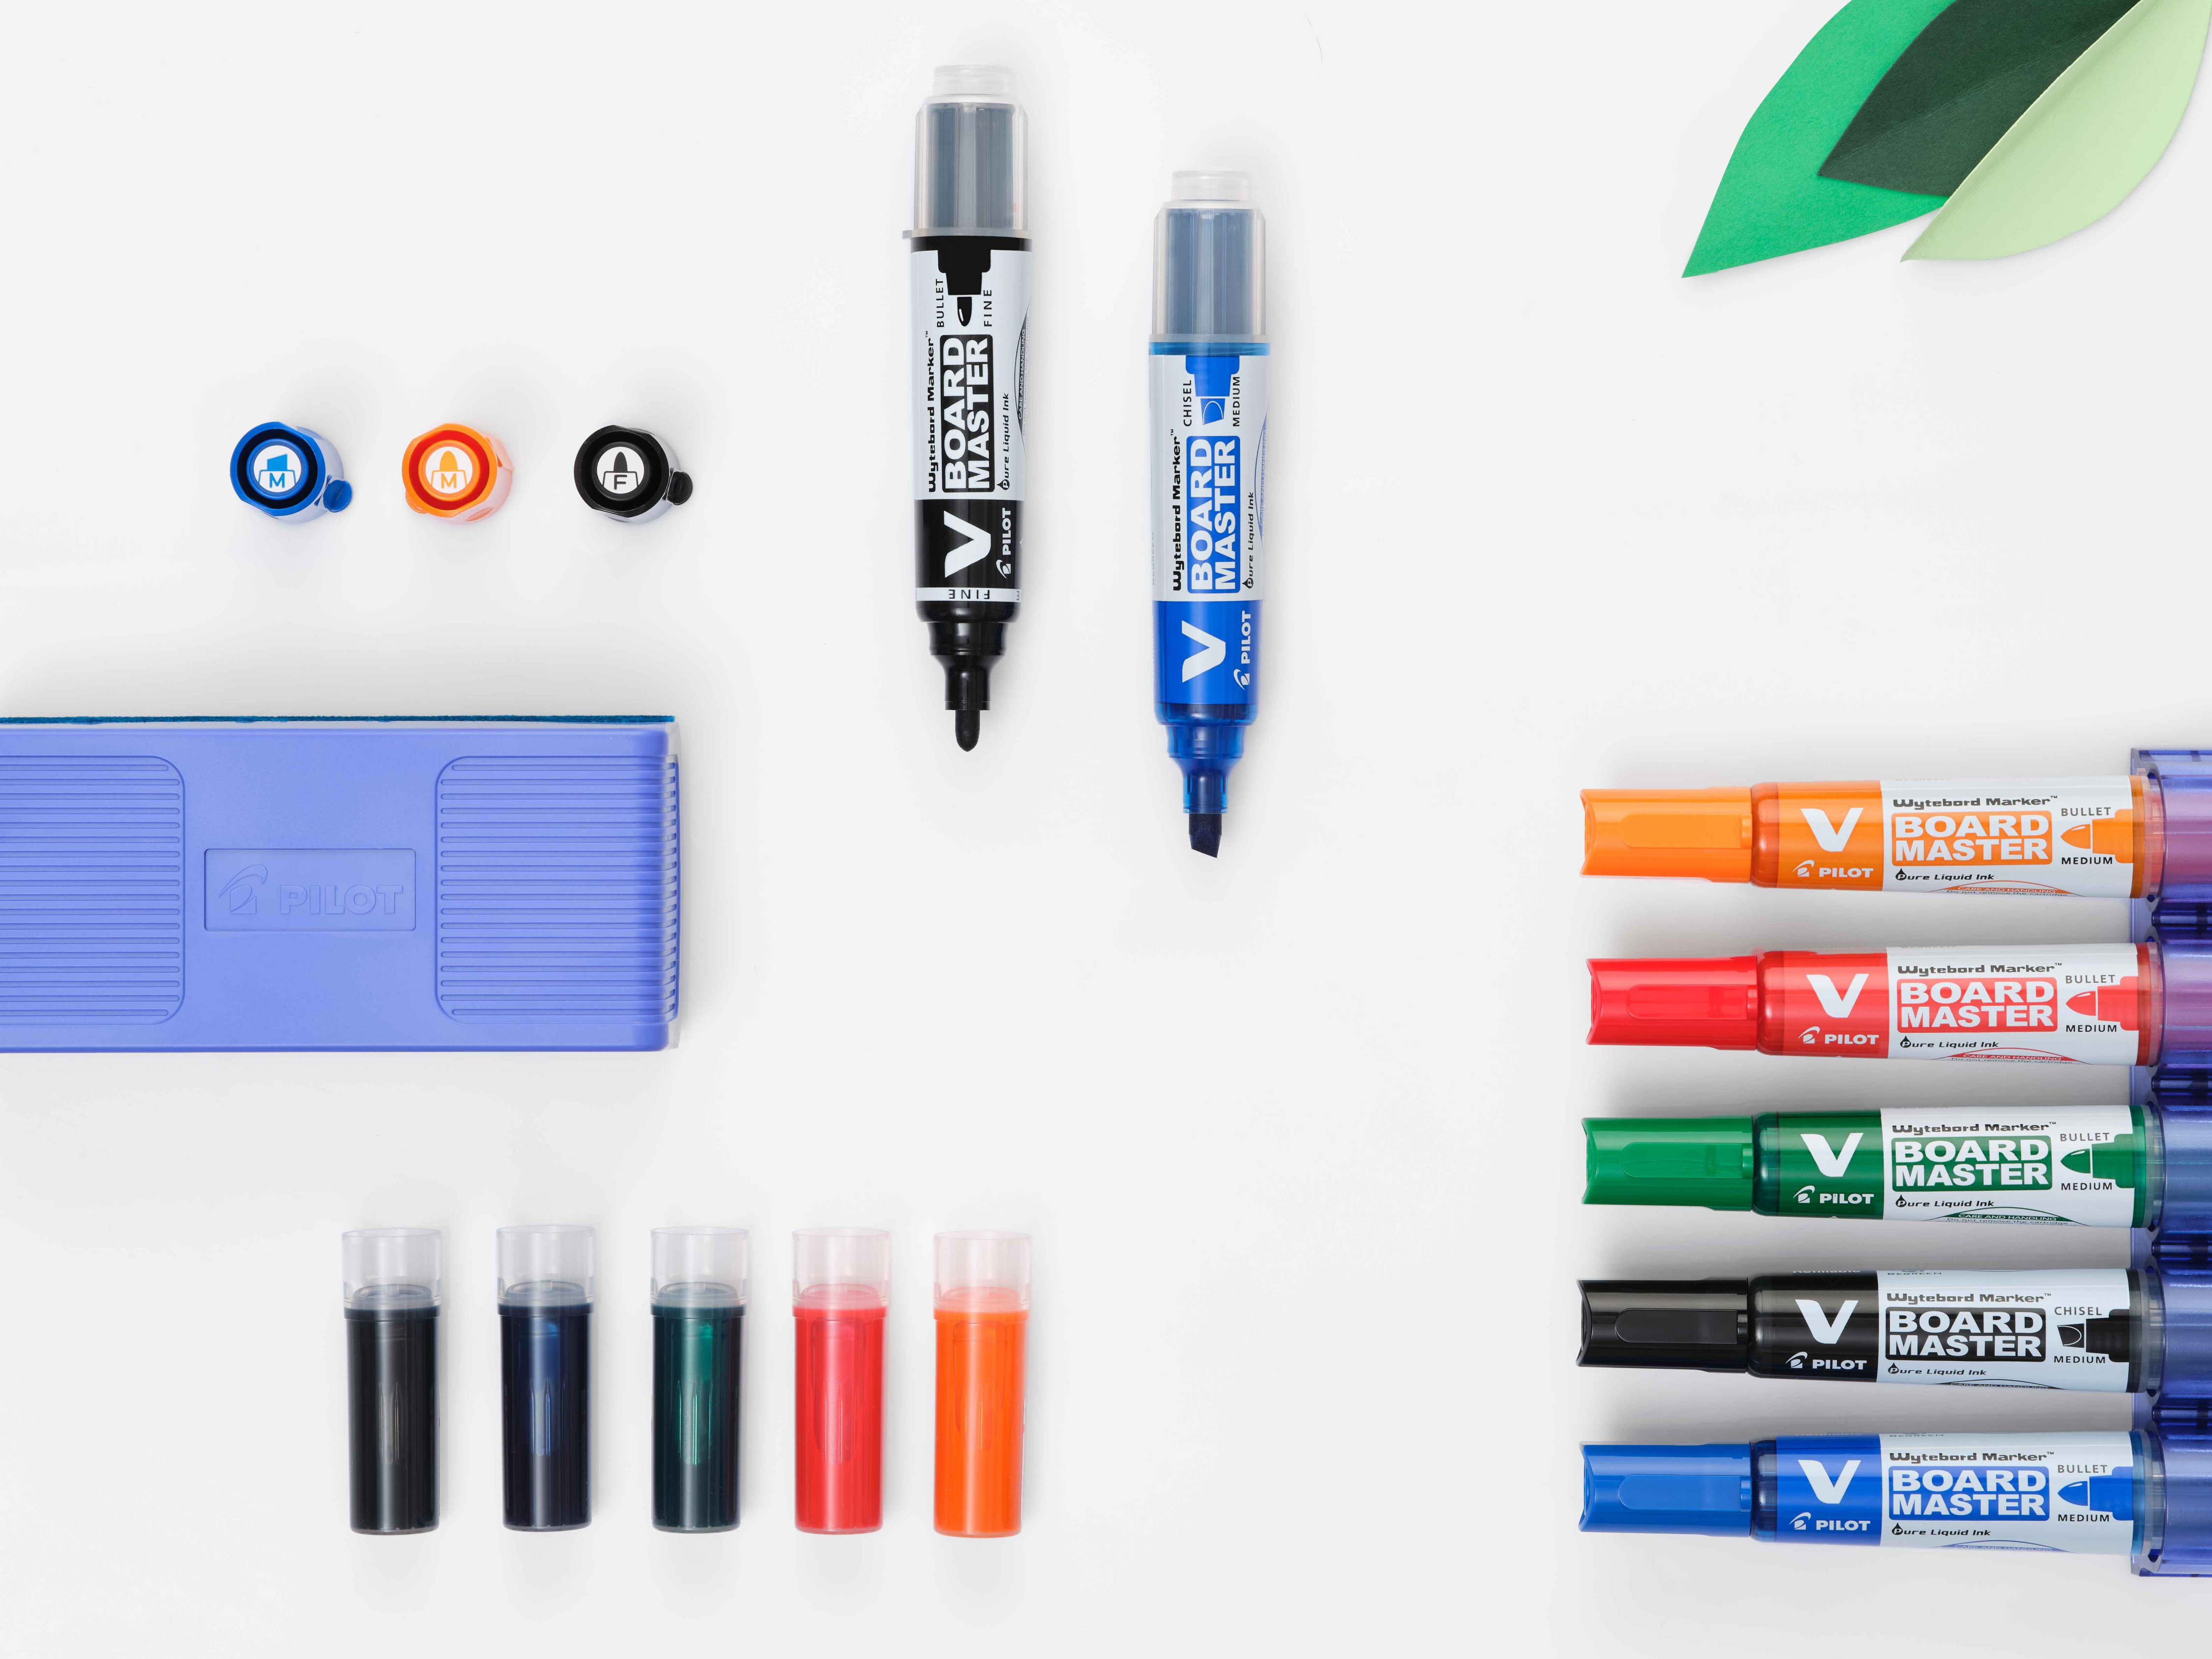 Array of PILOT V Board Master whiteboard markers, showcasing various vibrant colours, with a PILOT Wyteboard Eraser laying on whiteboard